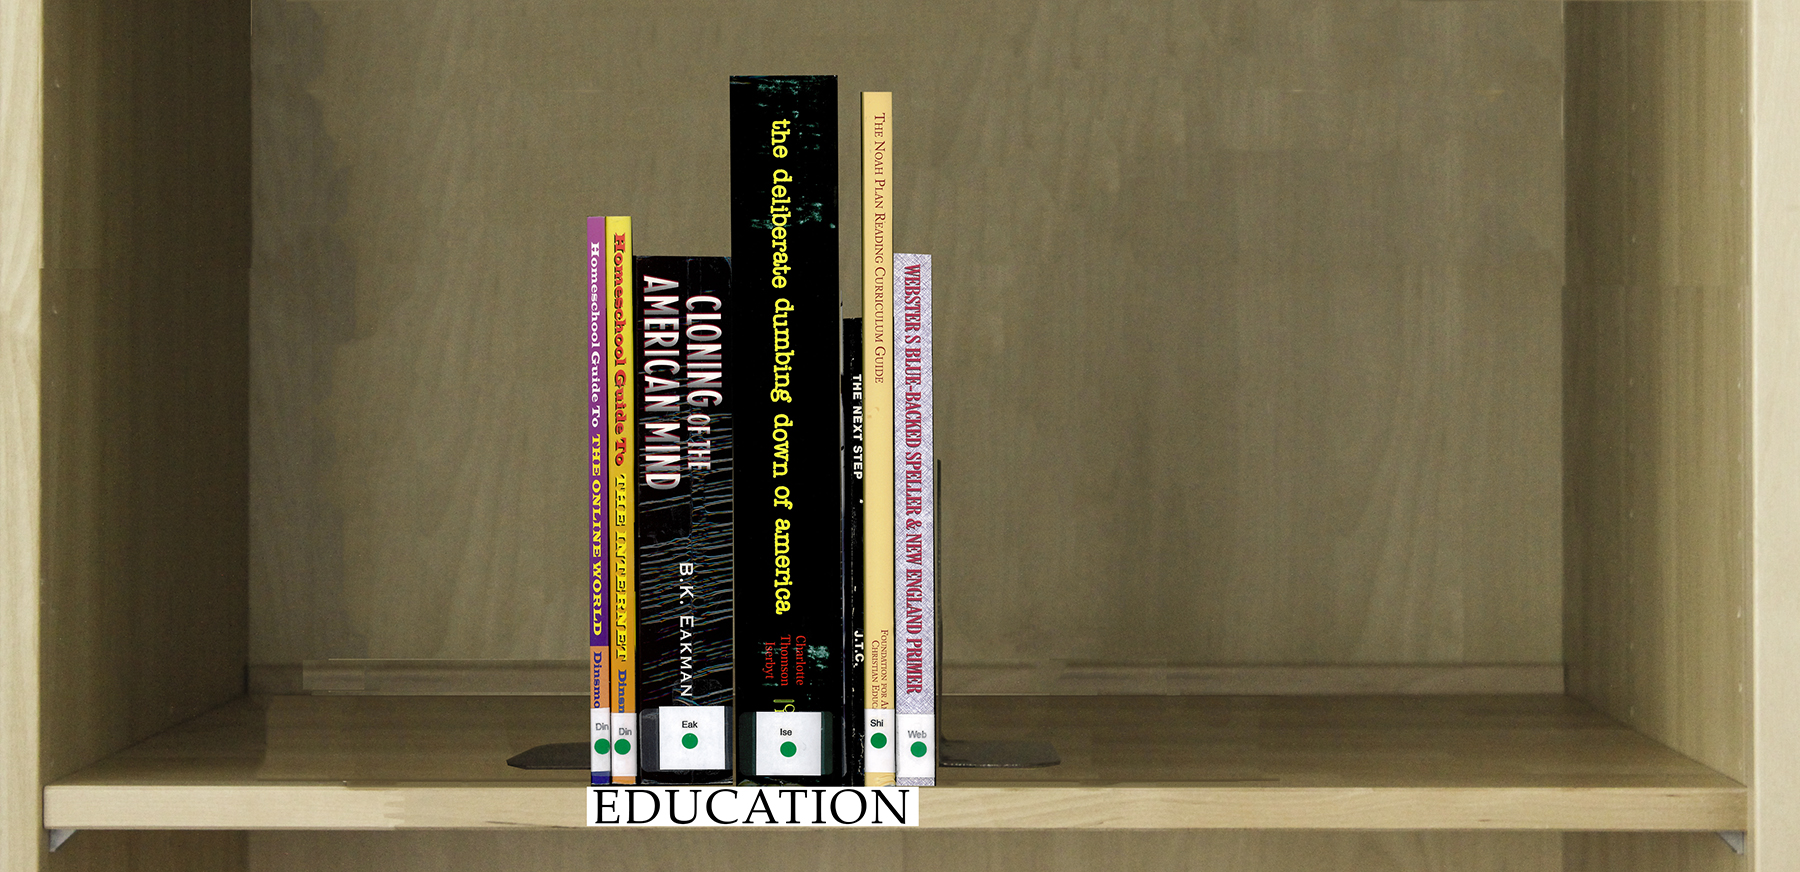 Index of Books Under the Category Education.